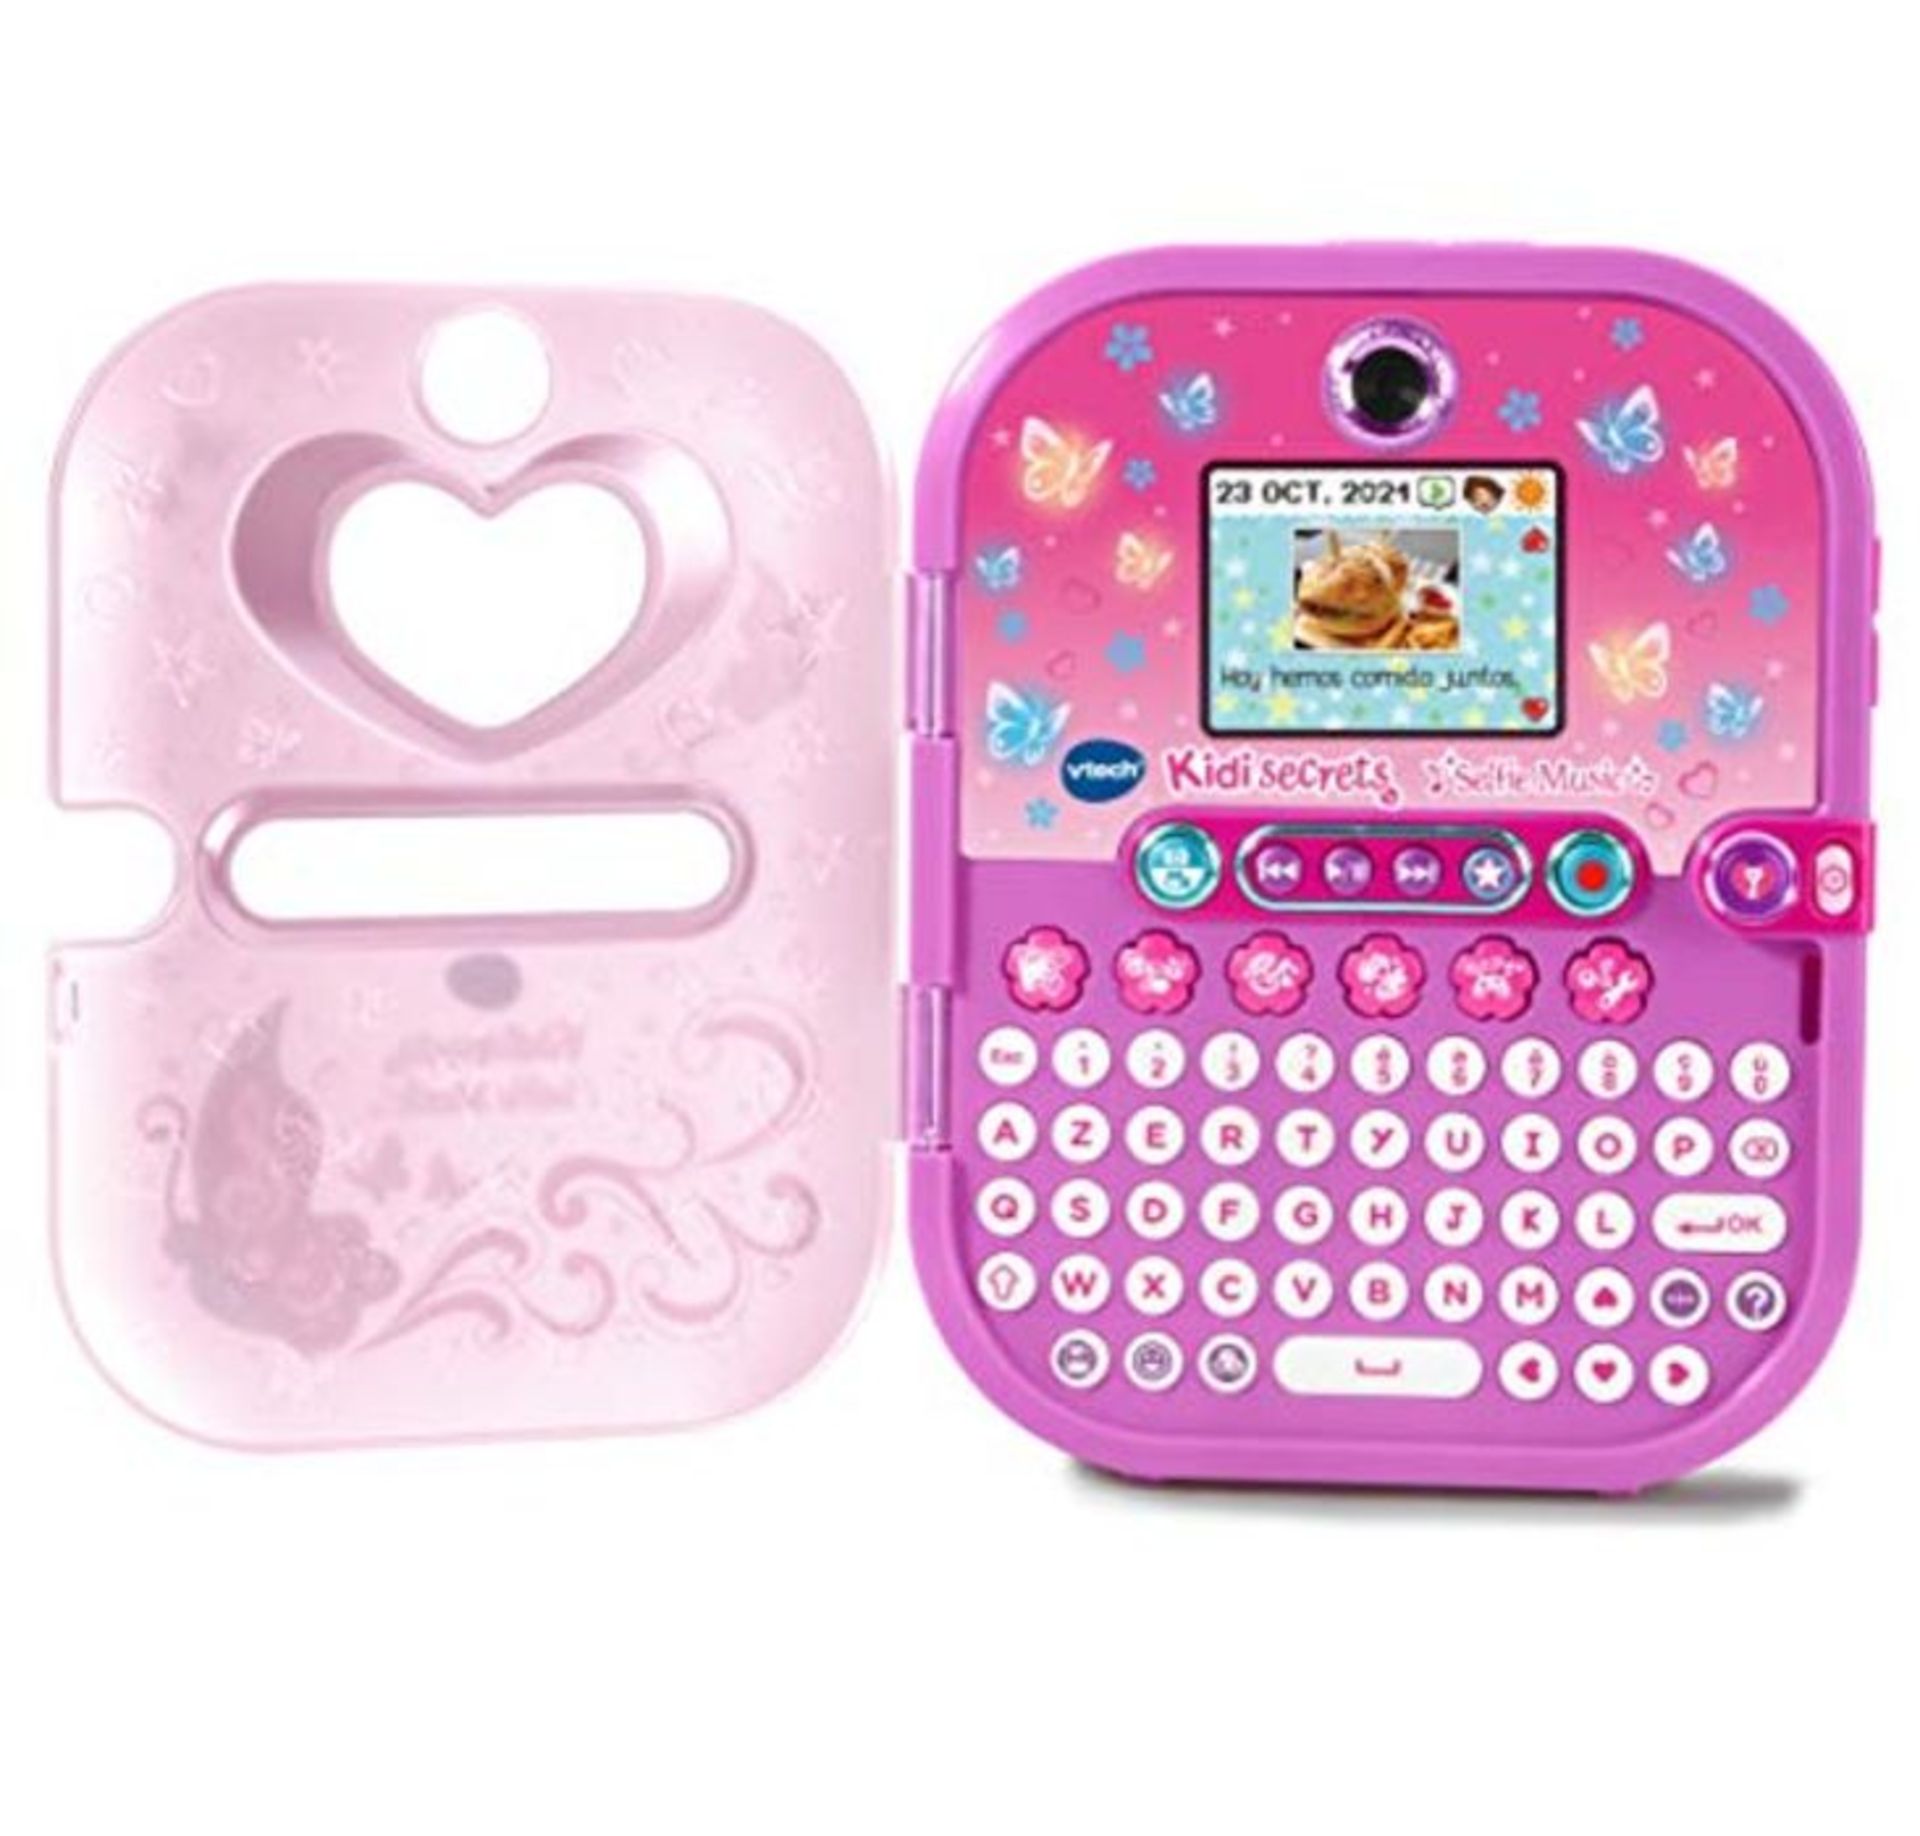 VTech KidiSecrets Selfi Music Personal Electronic Journal with Dual Camera for Photos